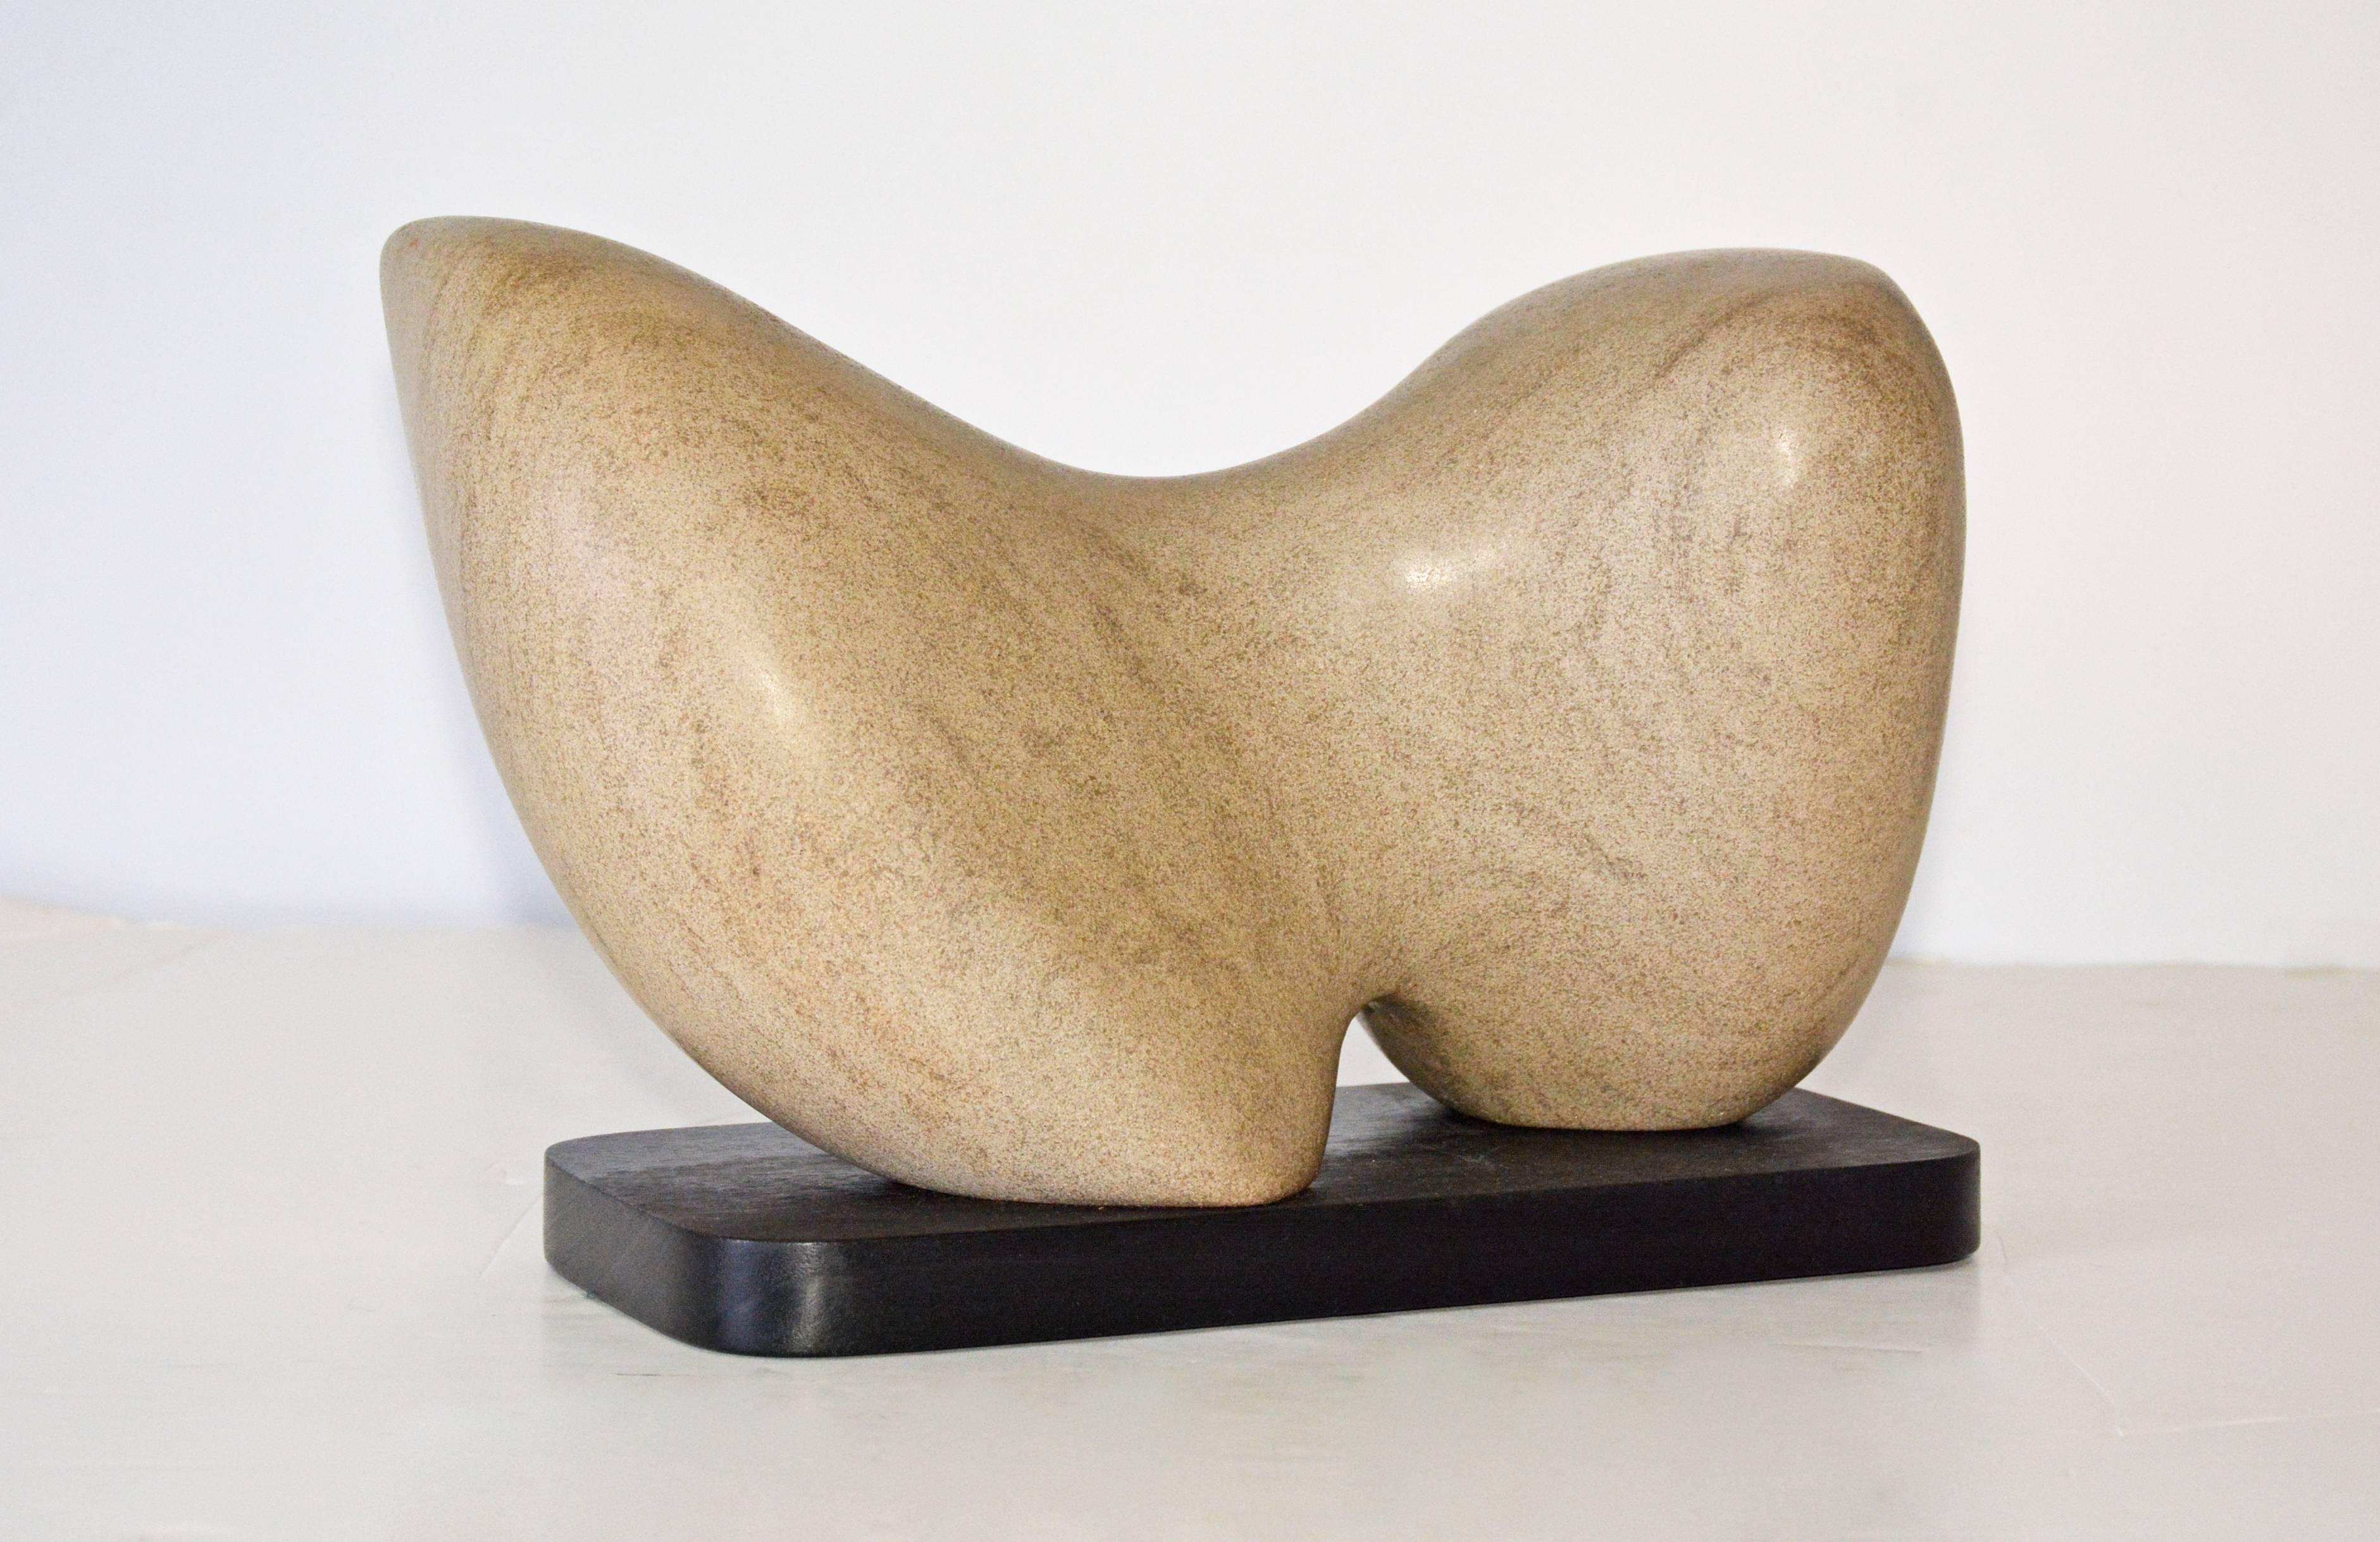 Award winning sculptor Jean Downey (1931-2009). The contemporary brown marble sculpture sits on a black wood base.
Jean Downey was born in Canada, studied art in Illinois, New York and Connecticut. Her work is included in private and corporate